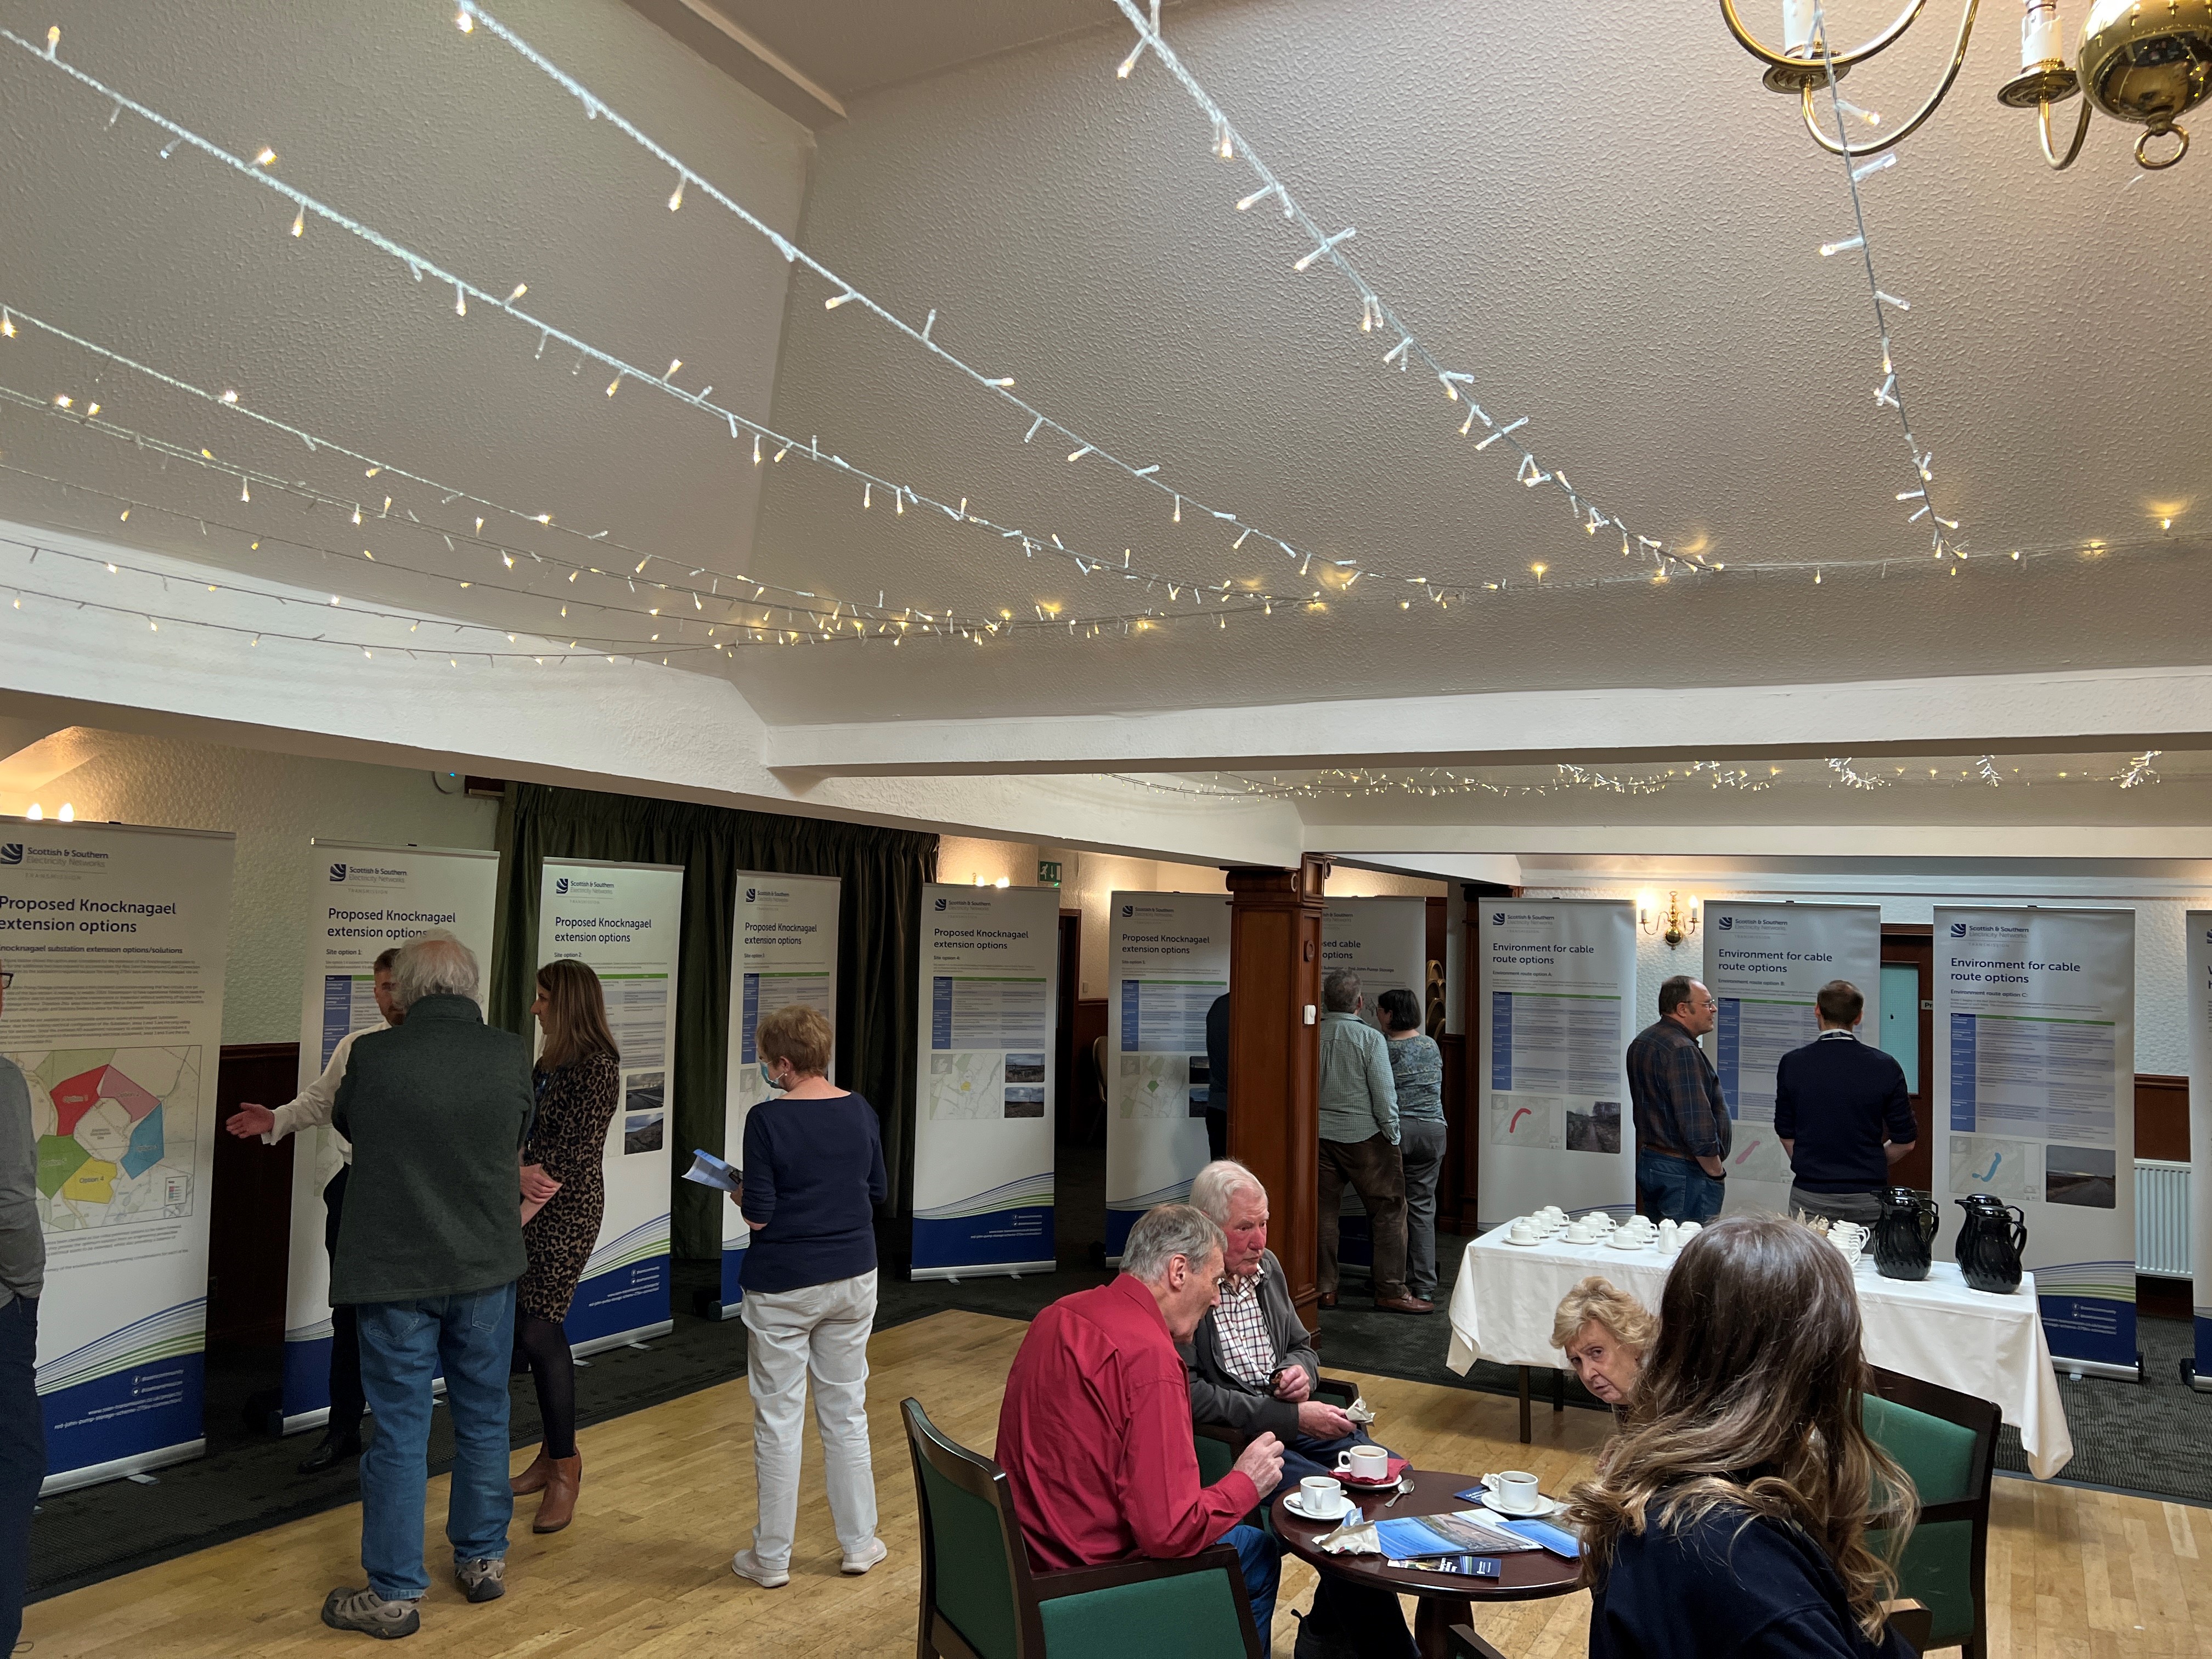 Members of the public examining project posters in a hall.